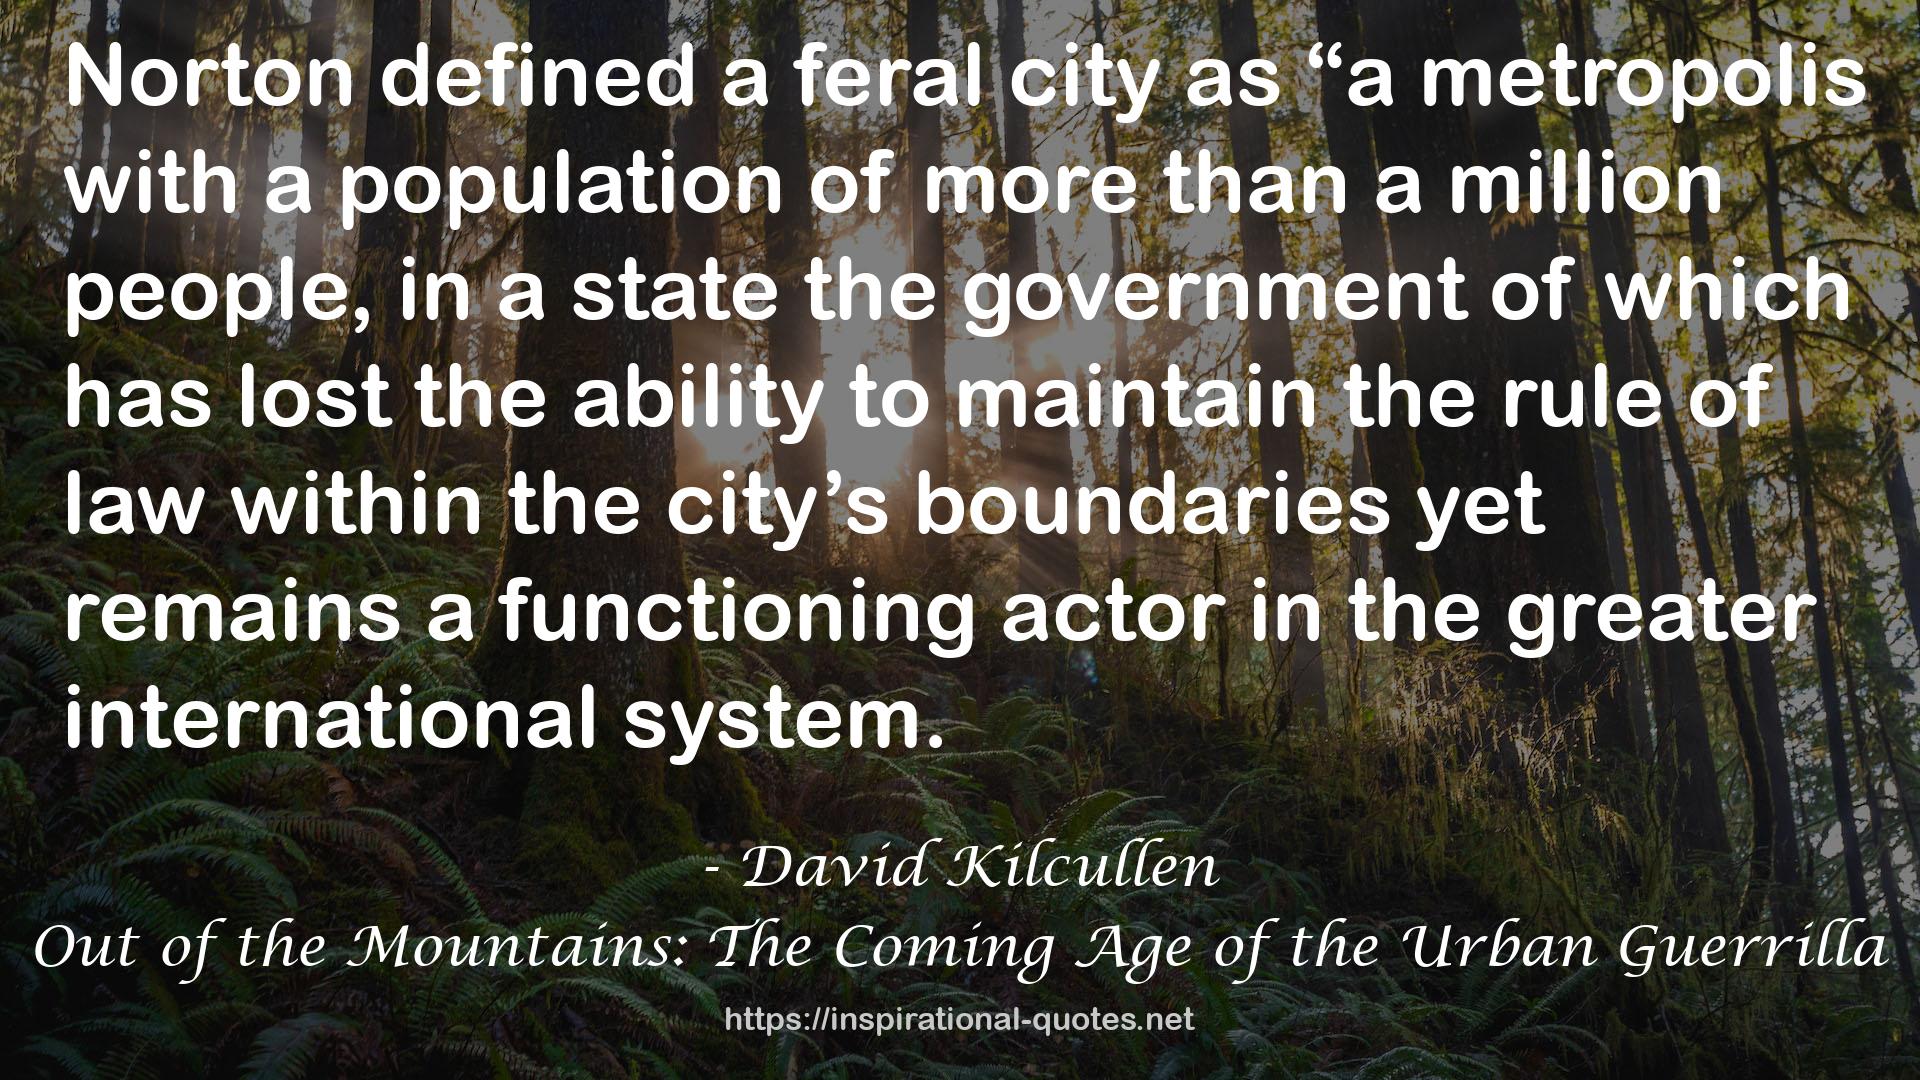 Out of the Mountains: The Coming Age of the Urban Guerrilla QUOTES